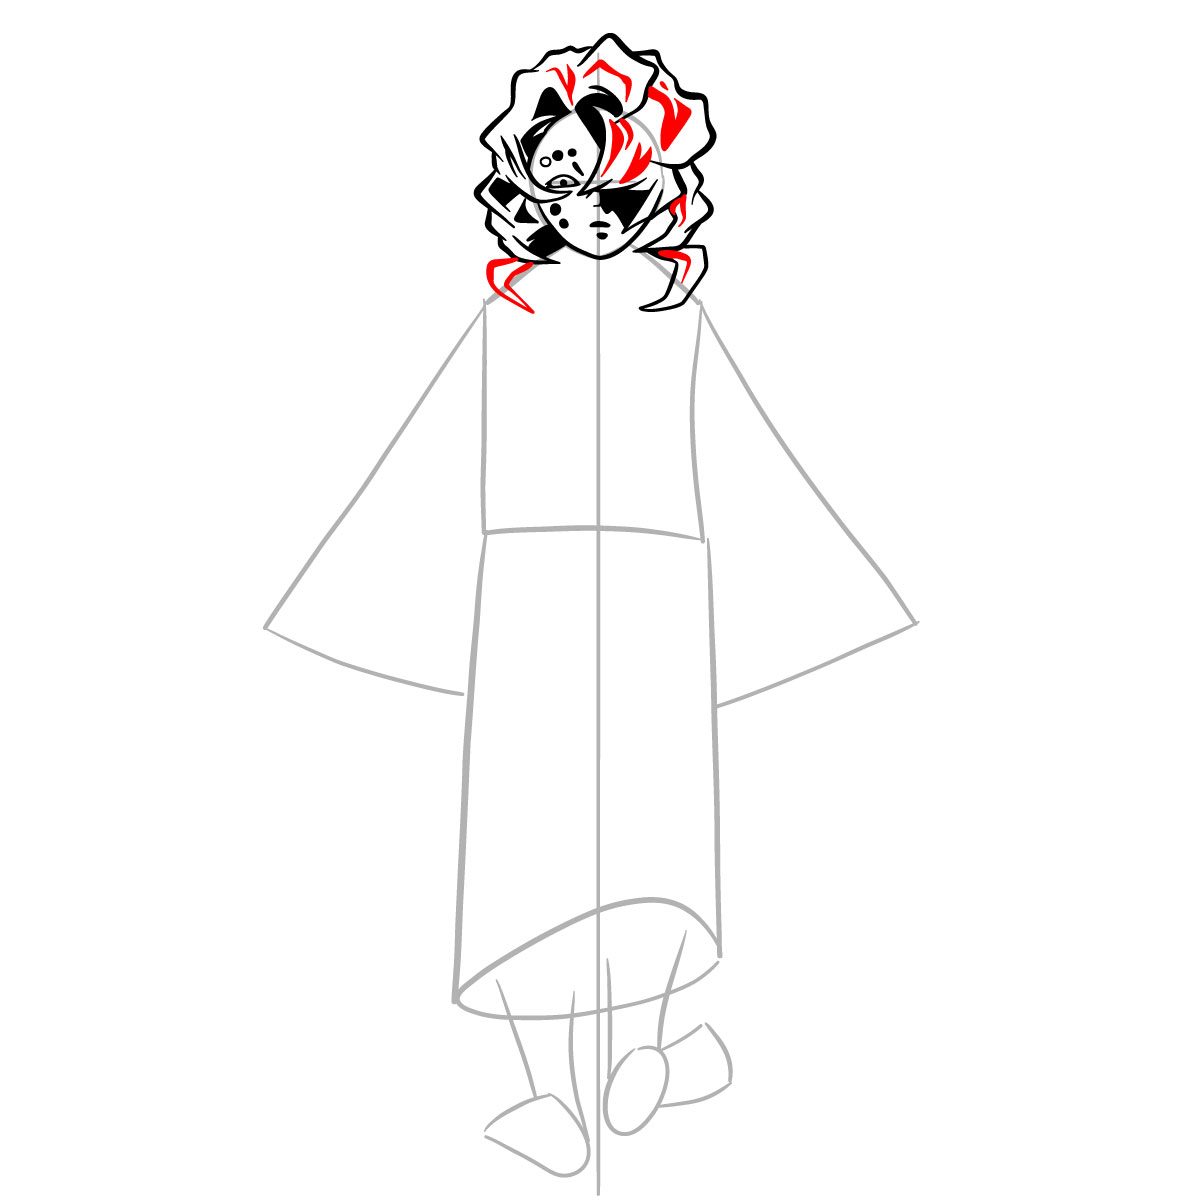 How to draw Rui from Demon Slayer - step 13